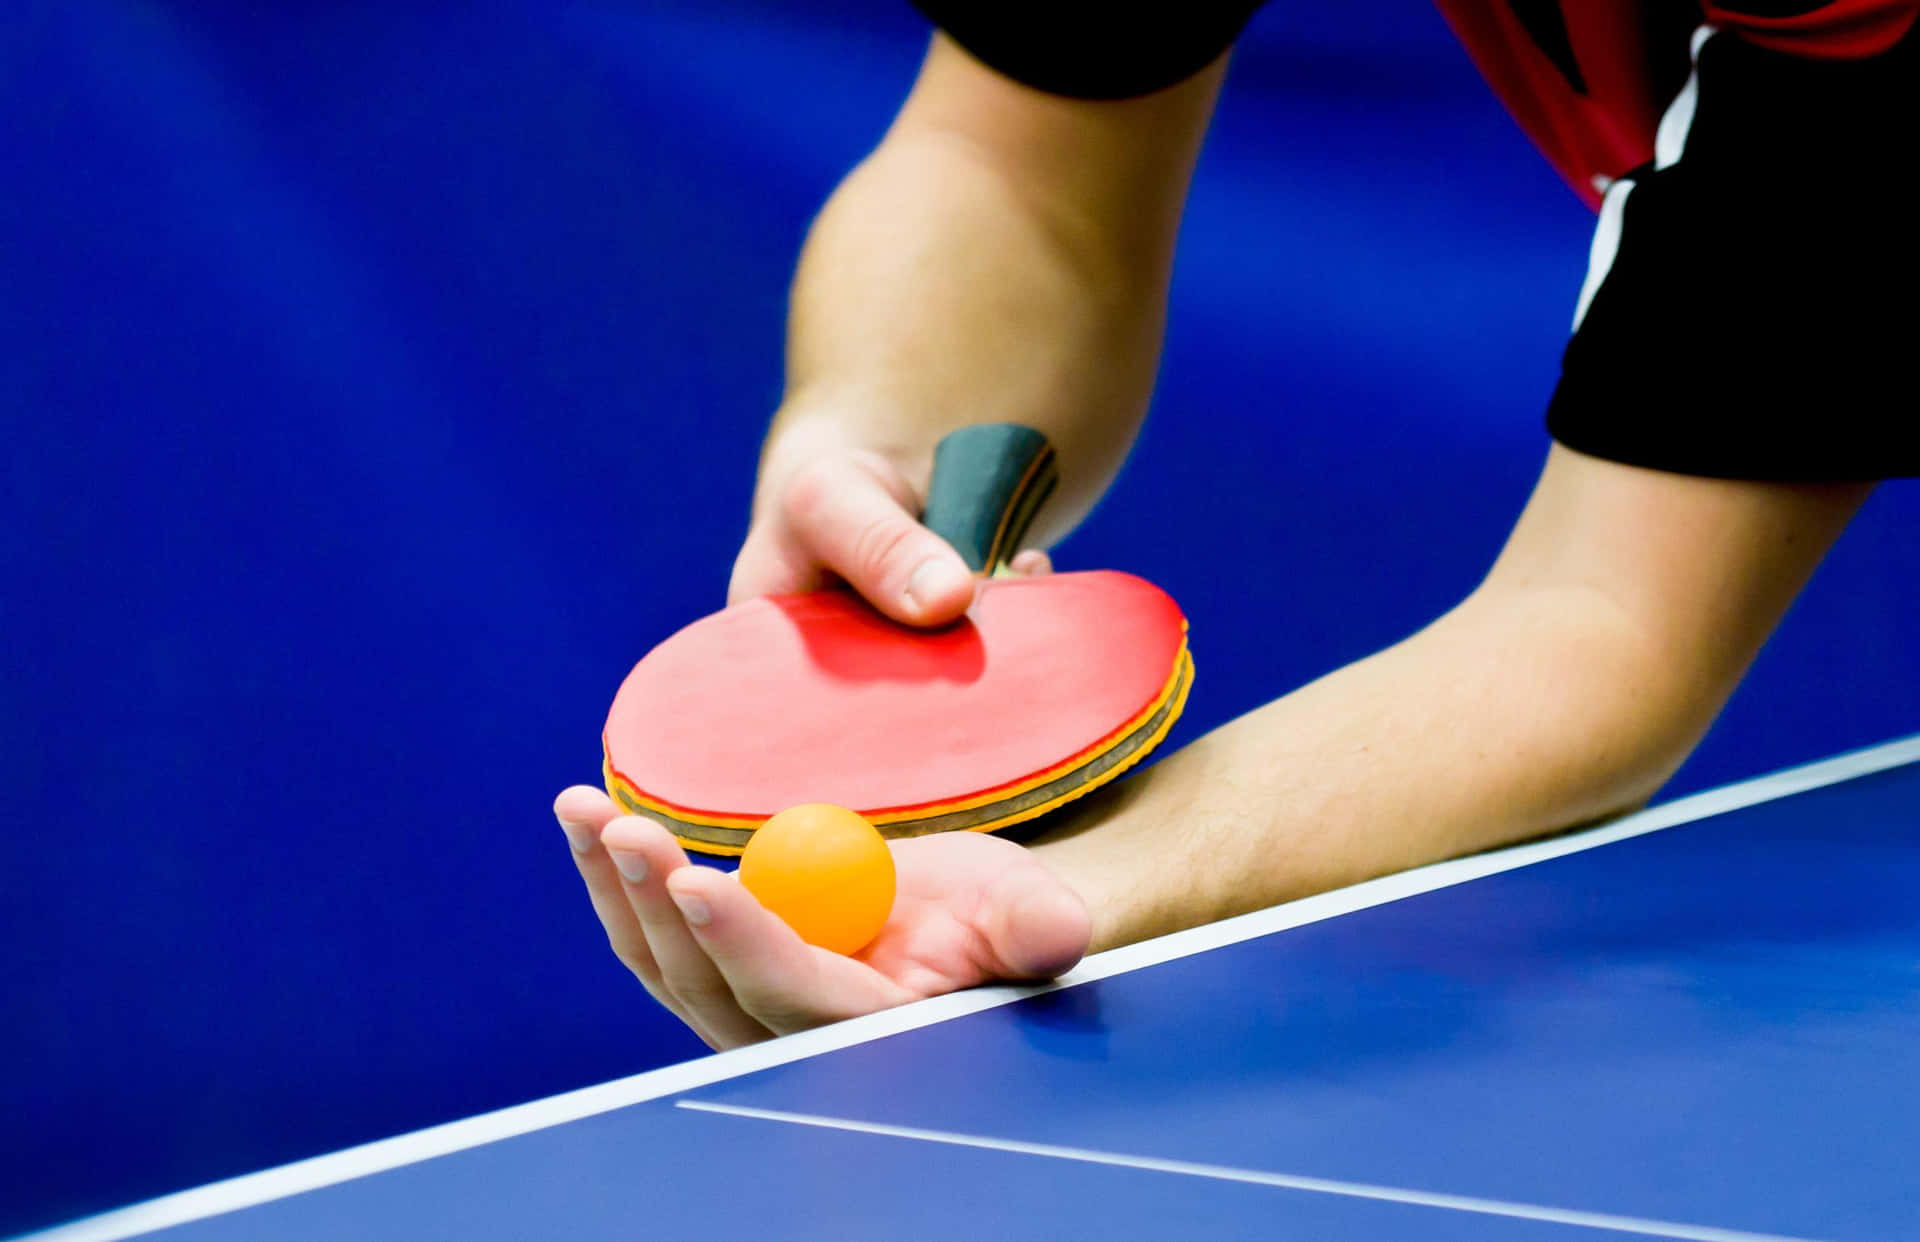 Two competitors in an epic Table Tennis match!